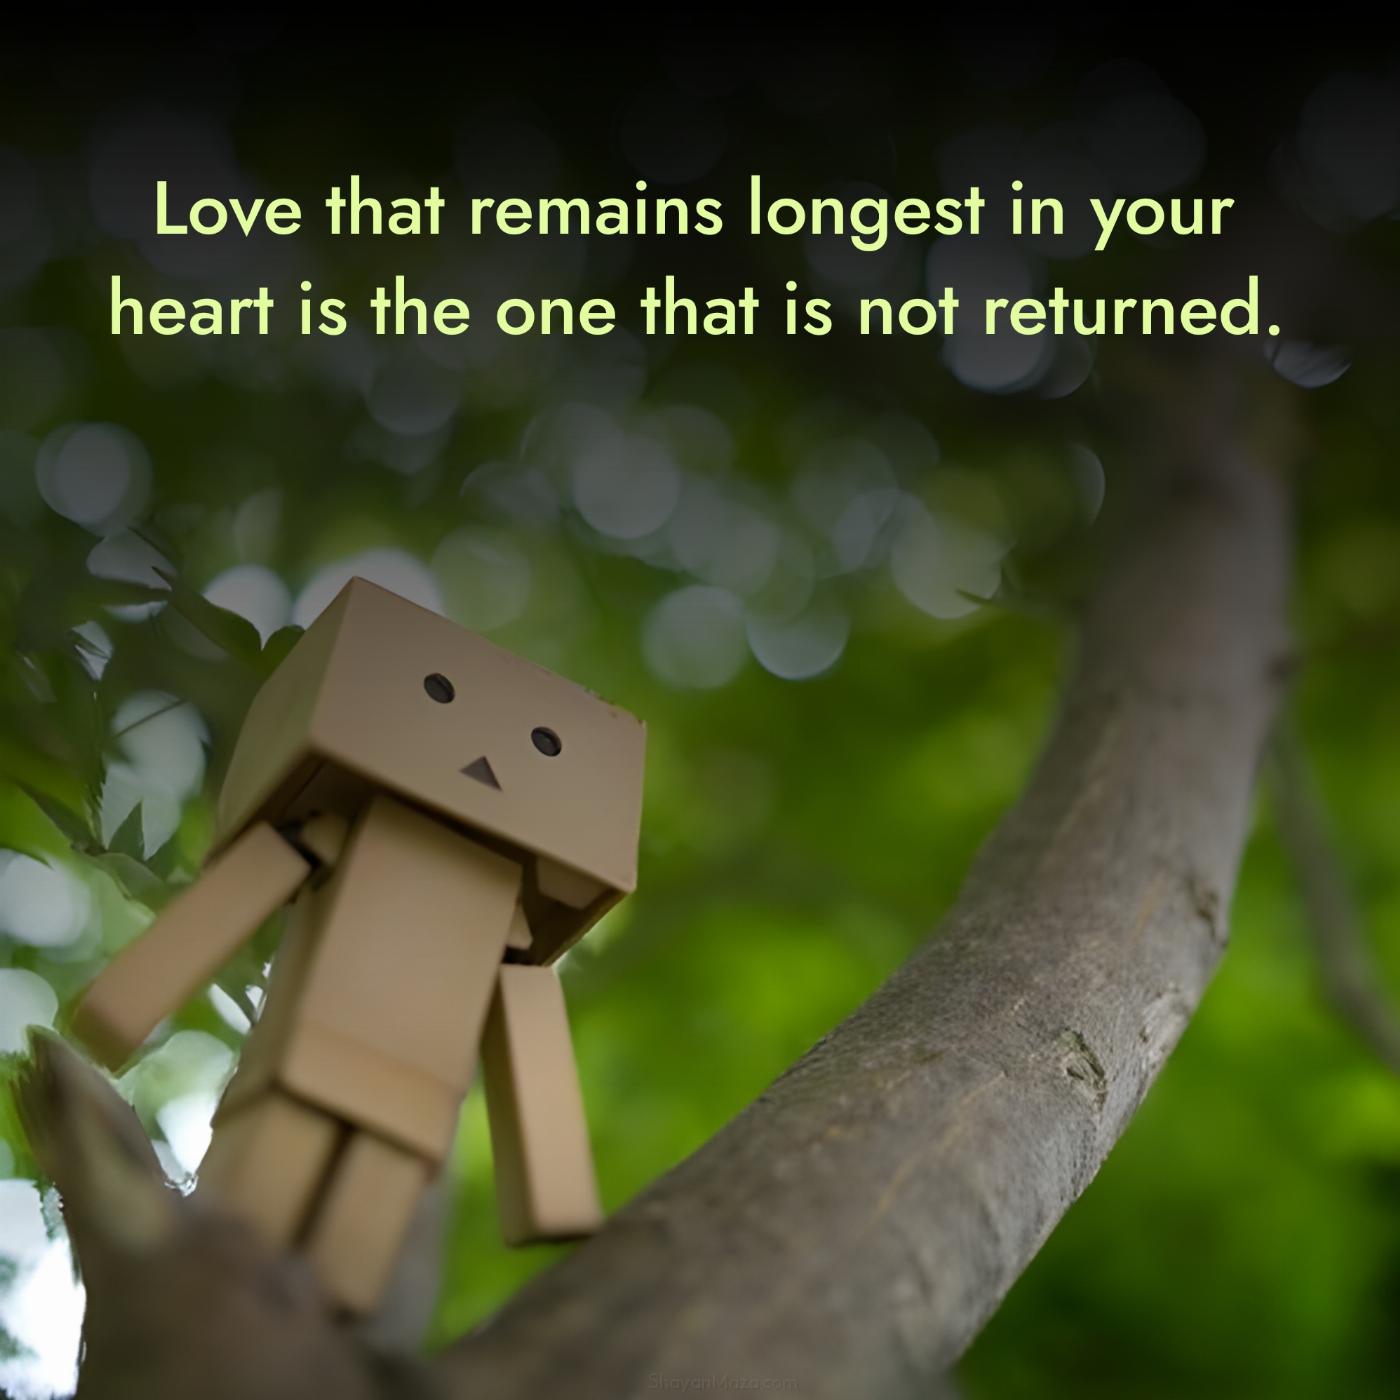 Love that remains longest in your heart is the one